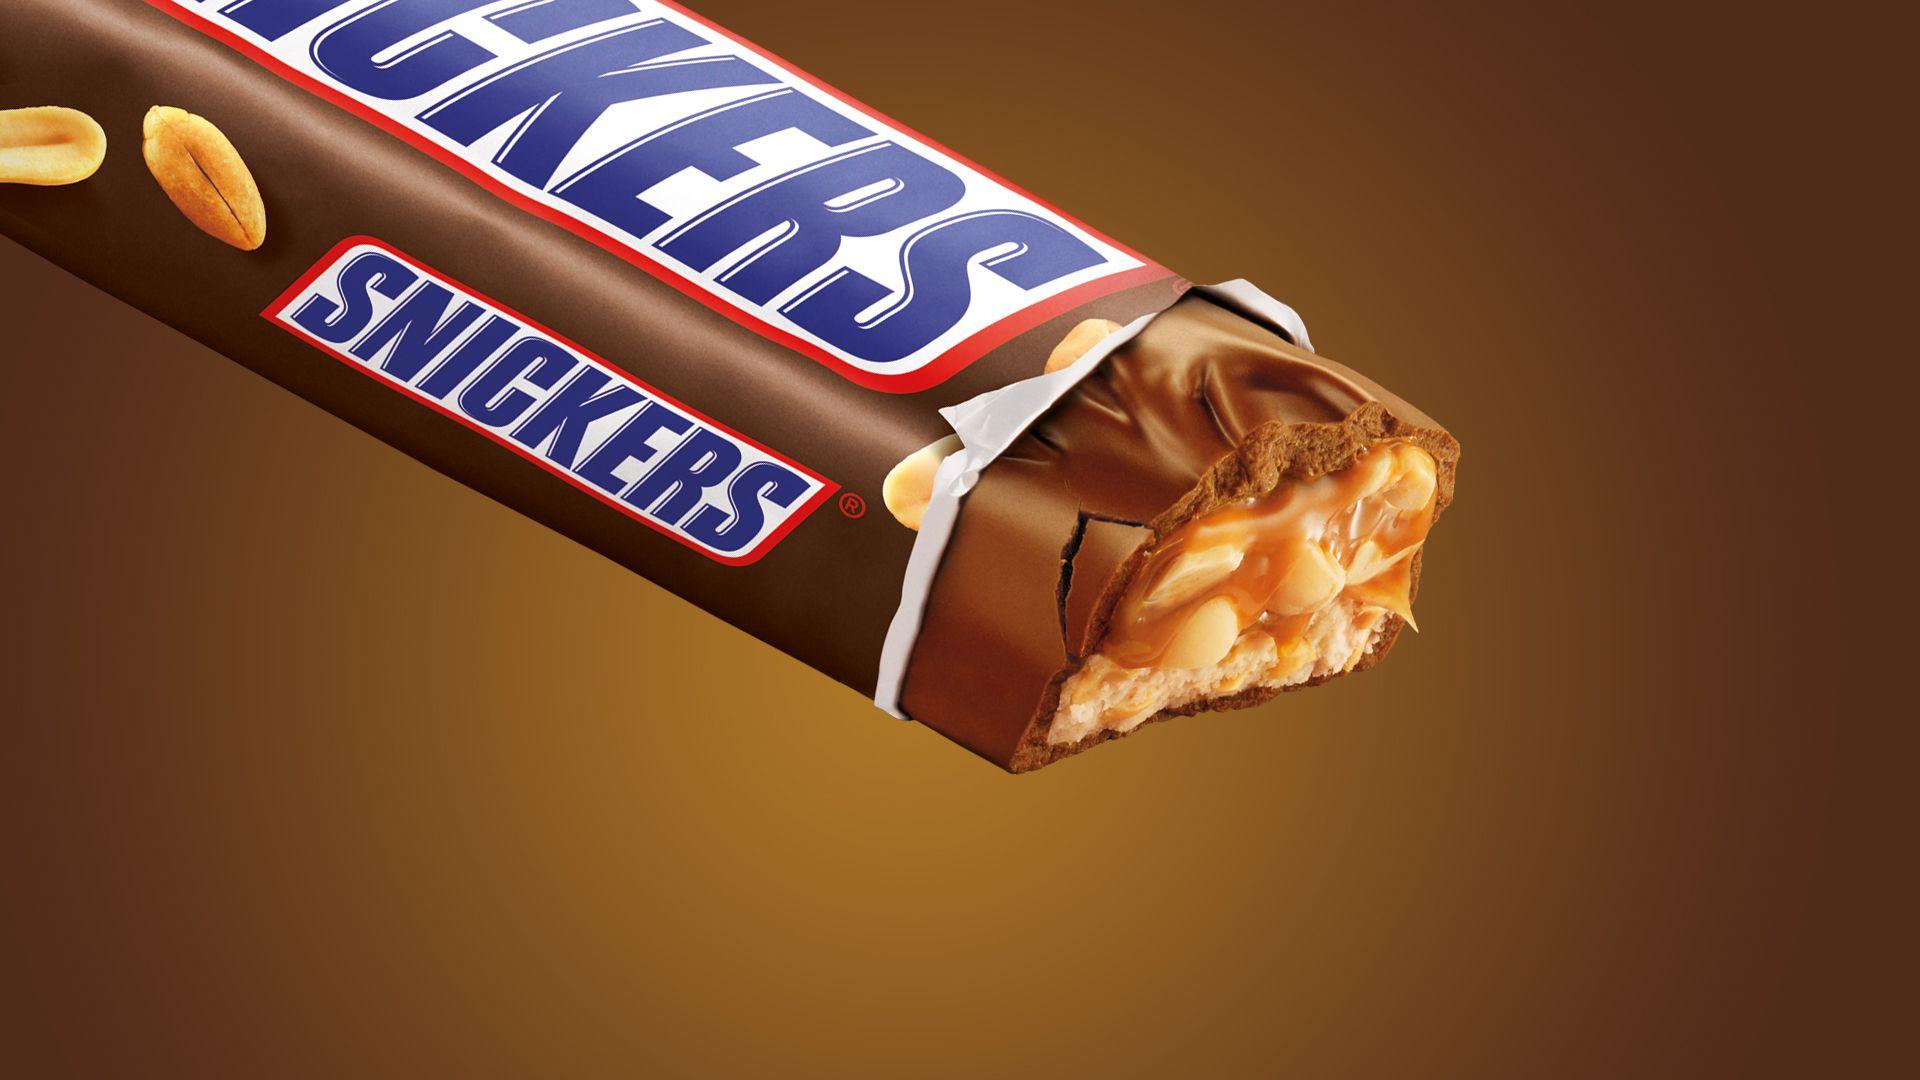 Snickers Wallpaper High Quality